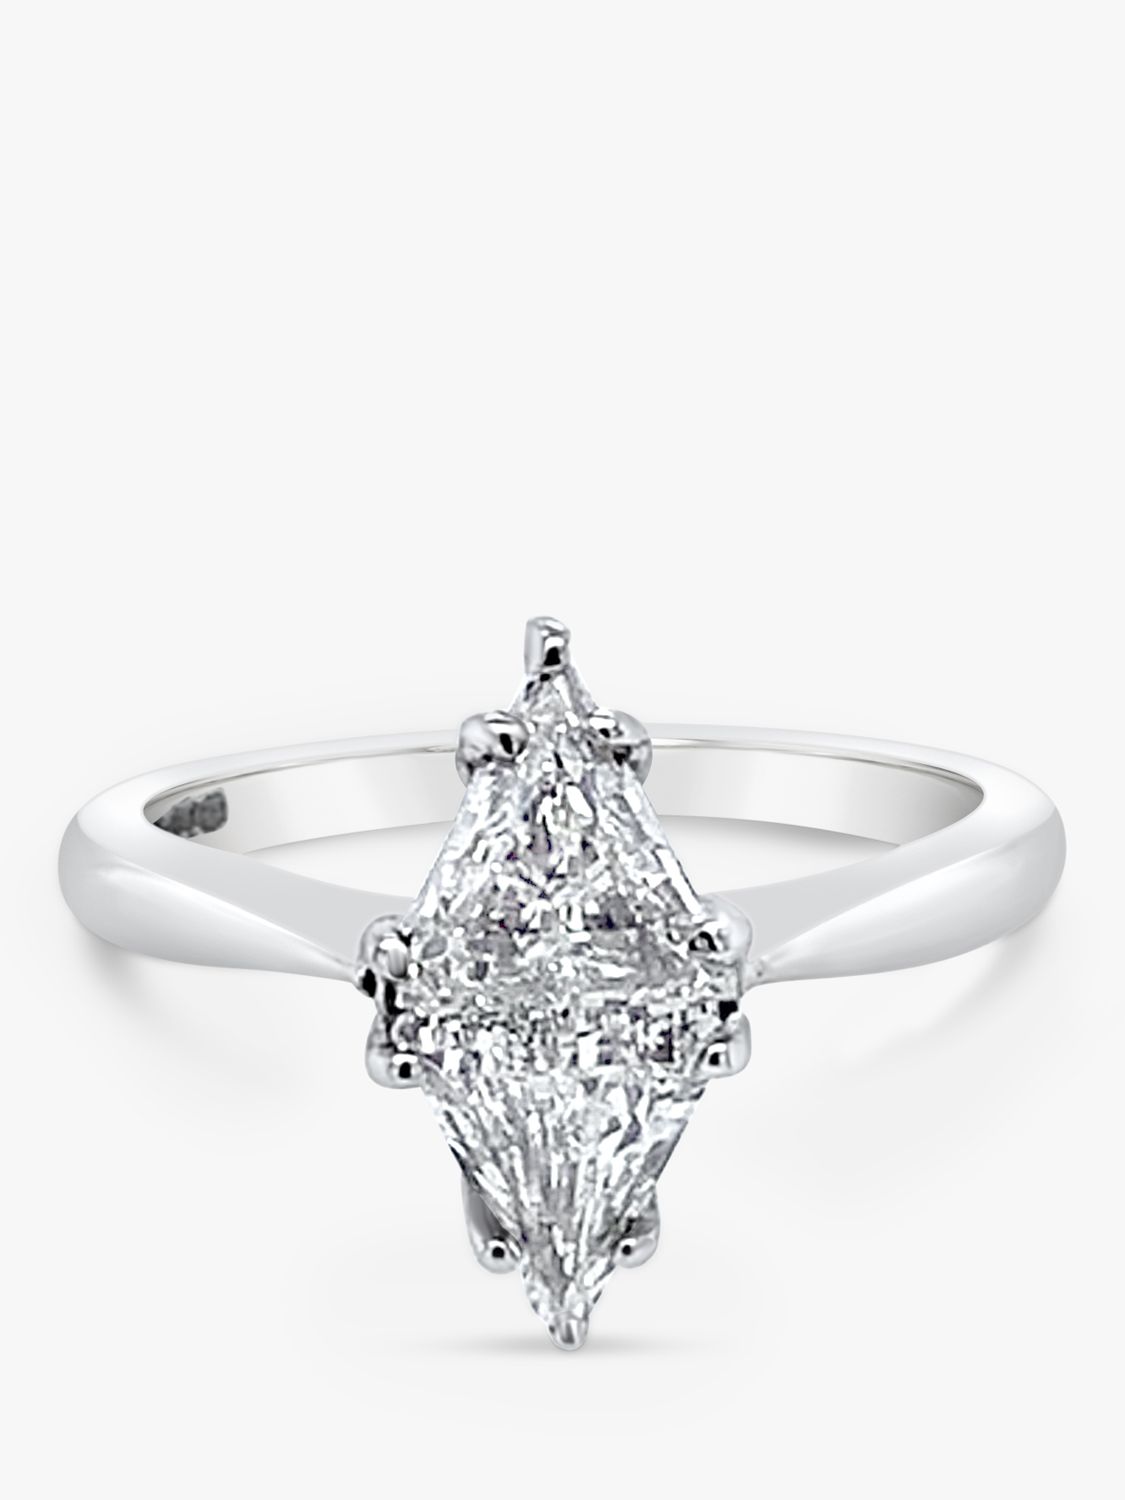 Buy Milton & Humble Jewellery 9ct White Gold Second Hand Trillion Cut Diamond Ring, Dated Circa 2000s Online at johnlewis.com